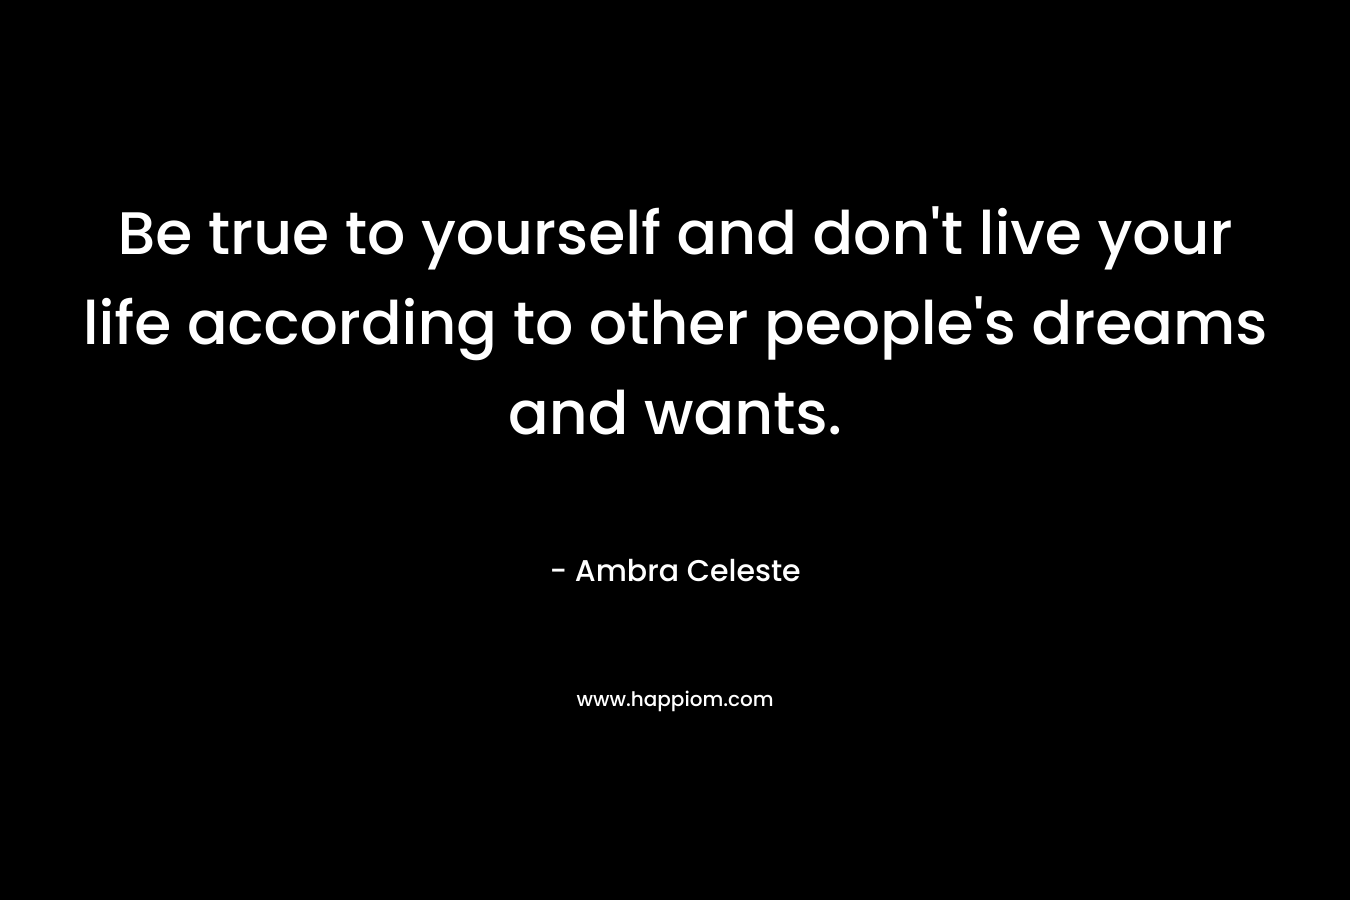 Be true to yourself and don’t live your life according to other people’s dreams and wants. – Ambra Celeste